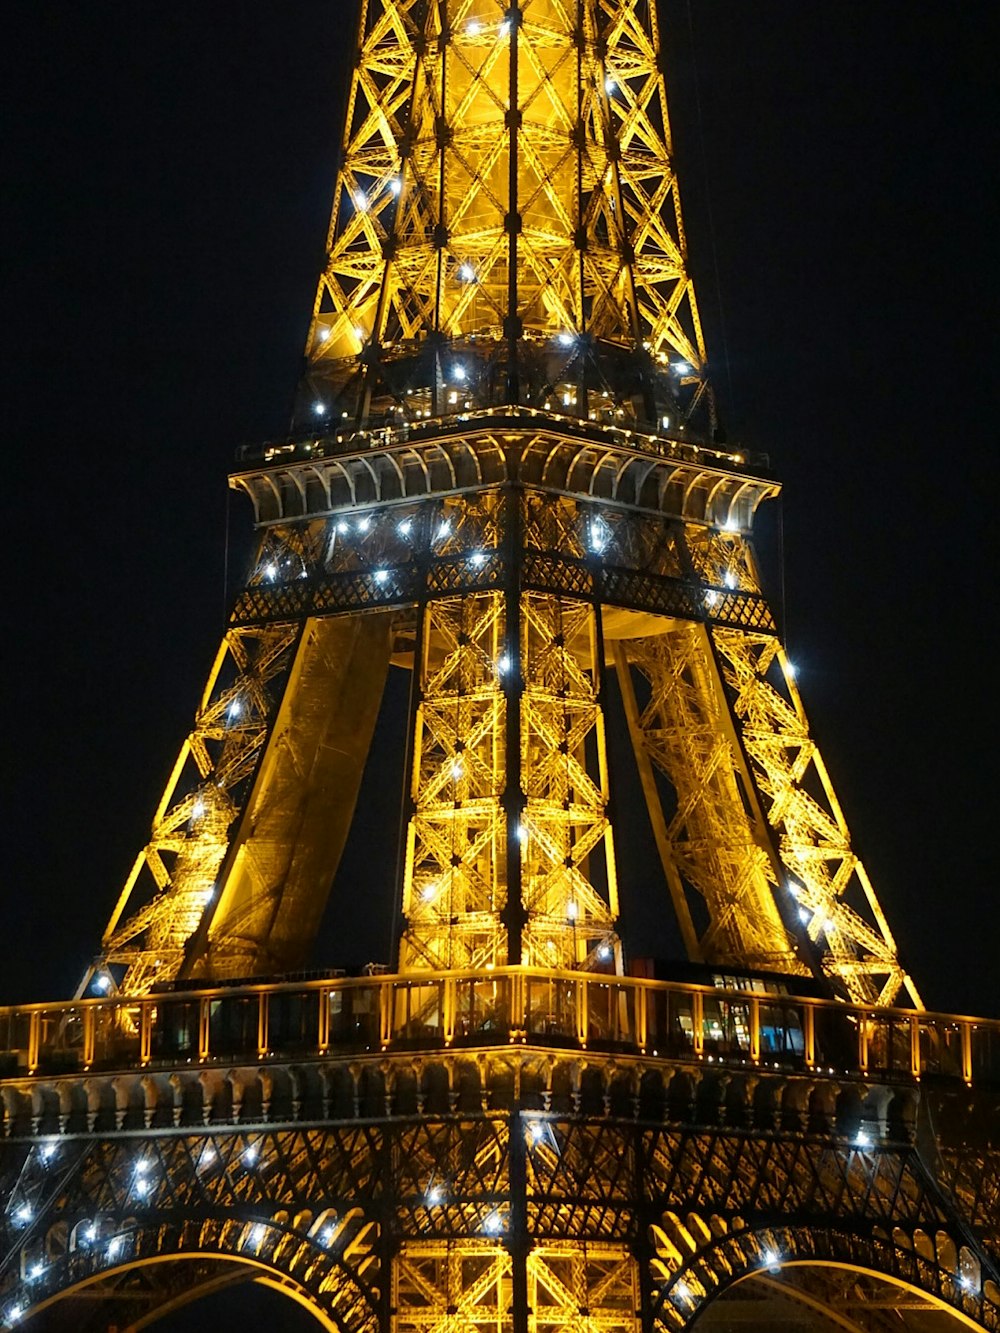 The eiffel tower is lit up at night photo – Free France Image on Unsplash